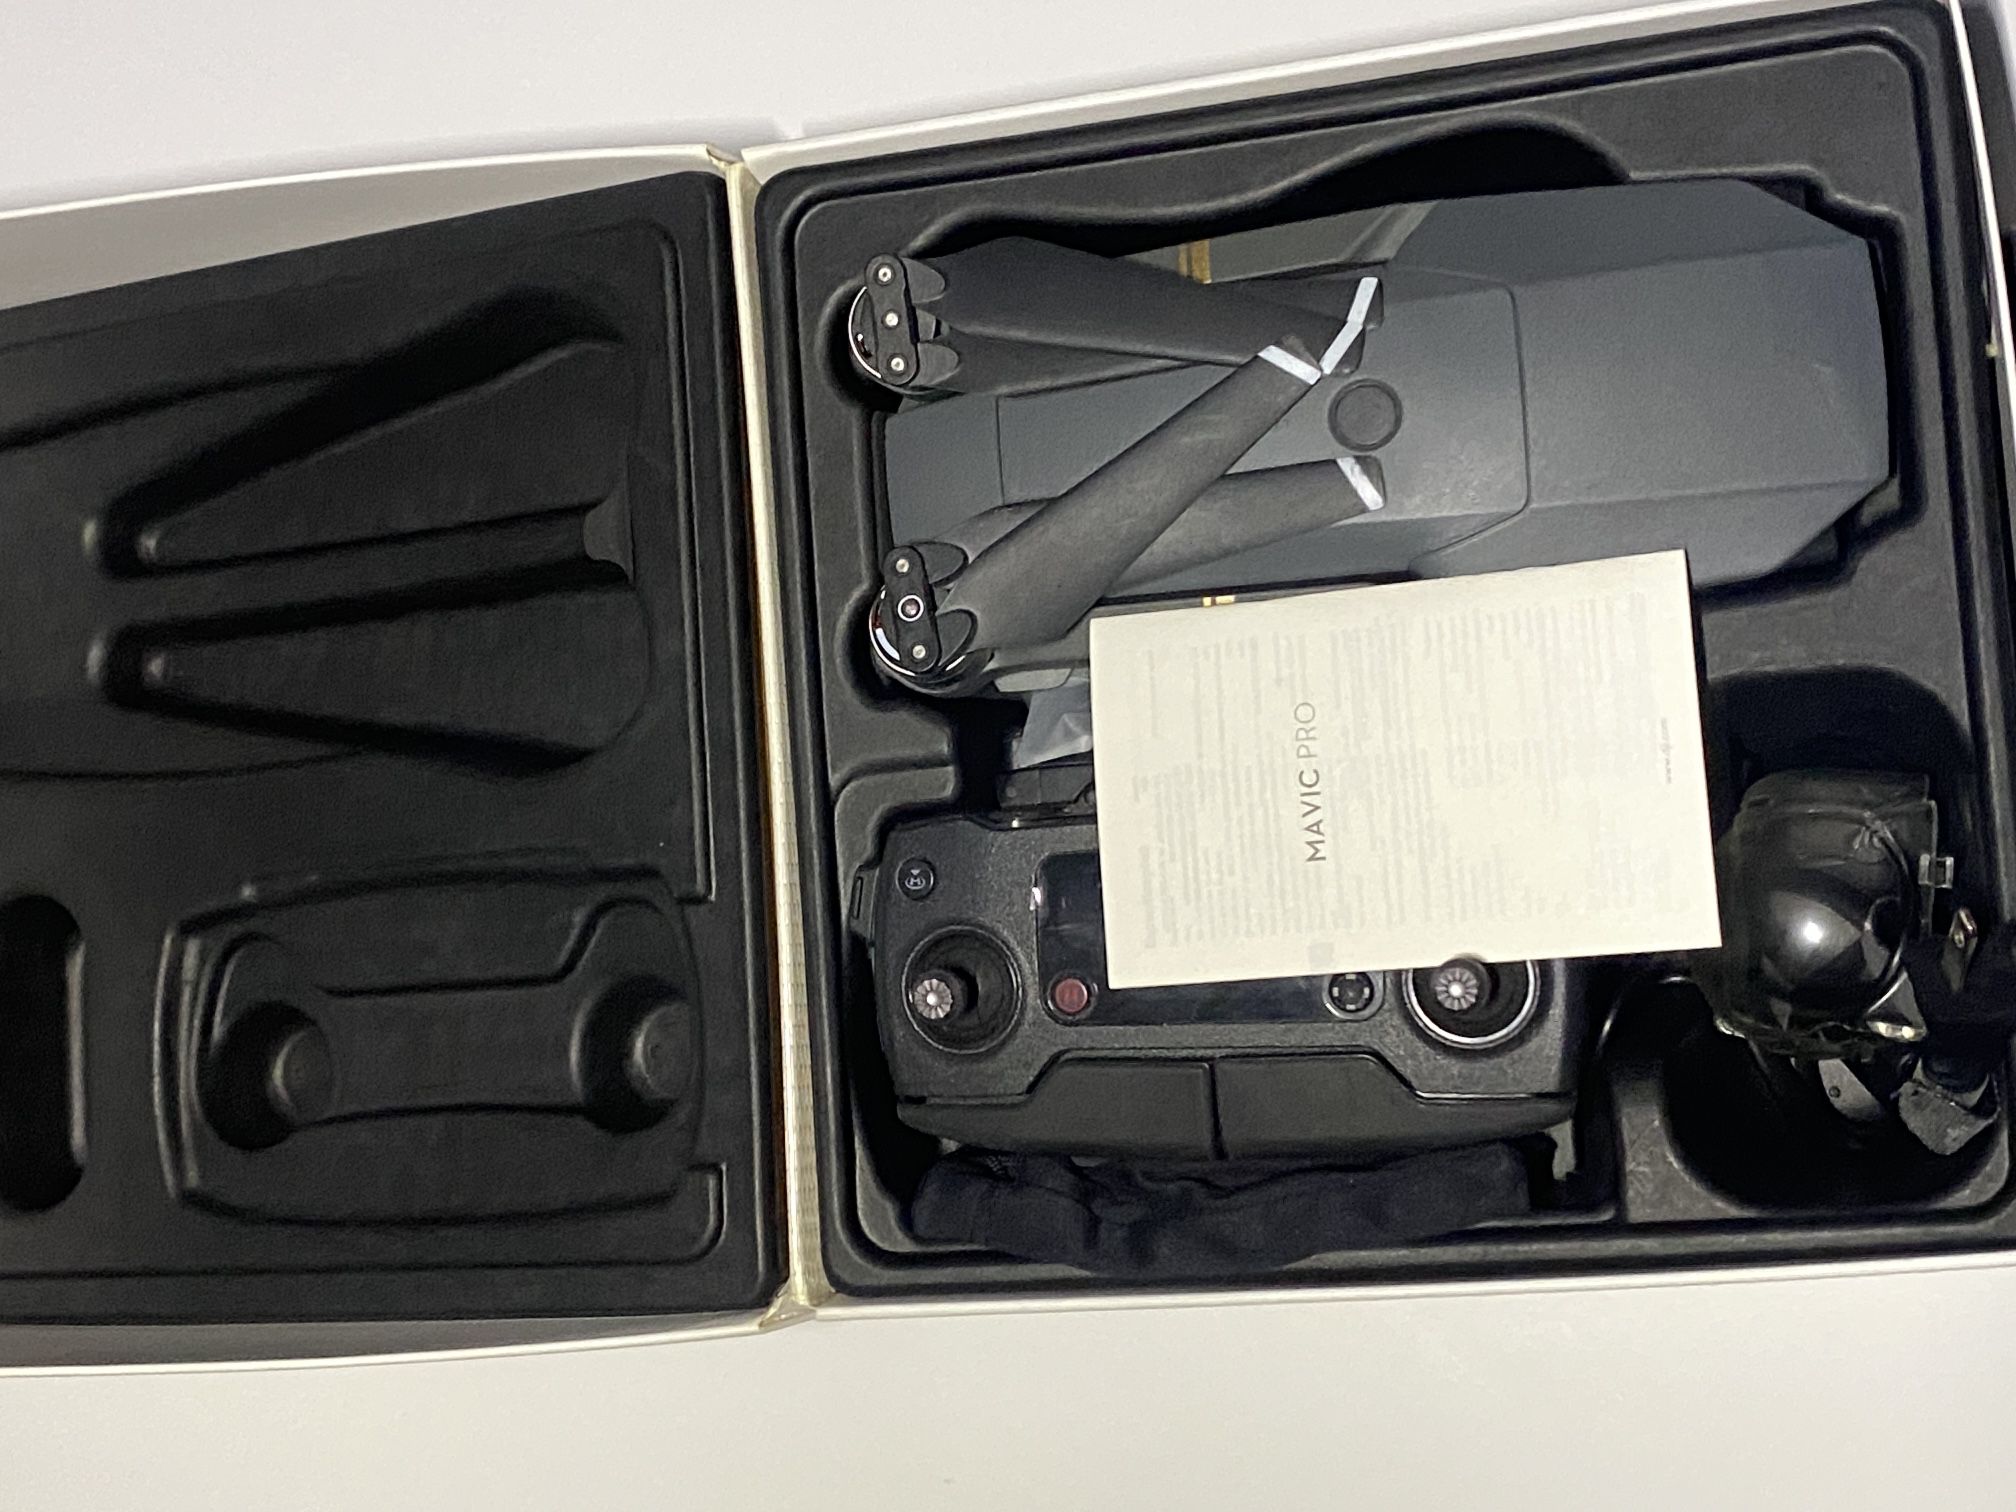 DJI Mavic Drone For Parts Remote Works Drone Does Not Fly